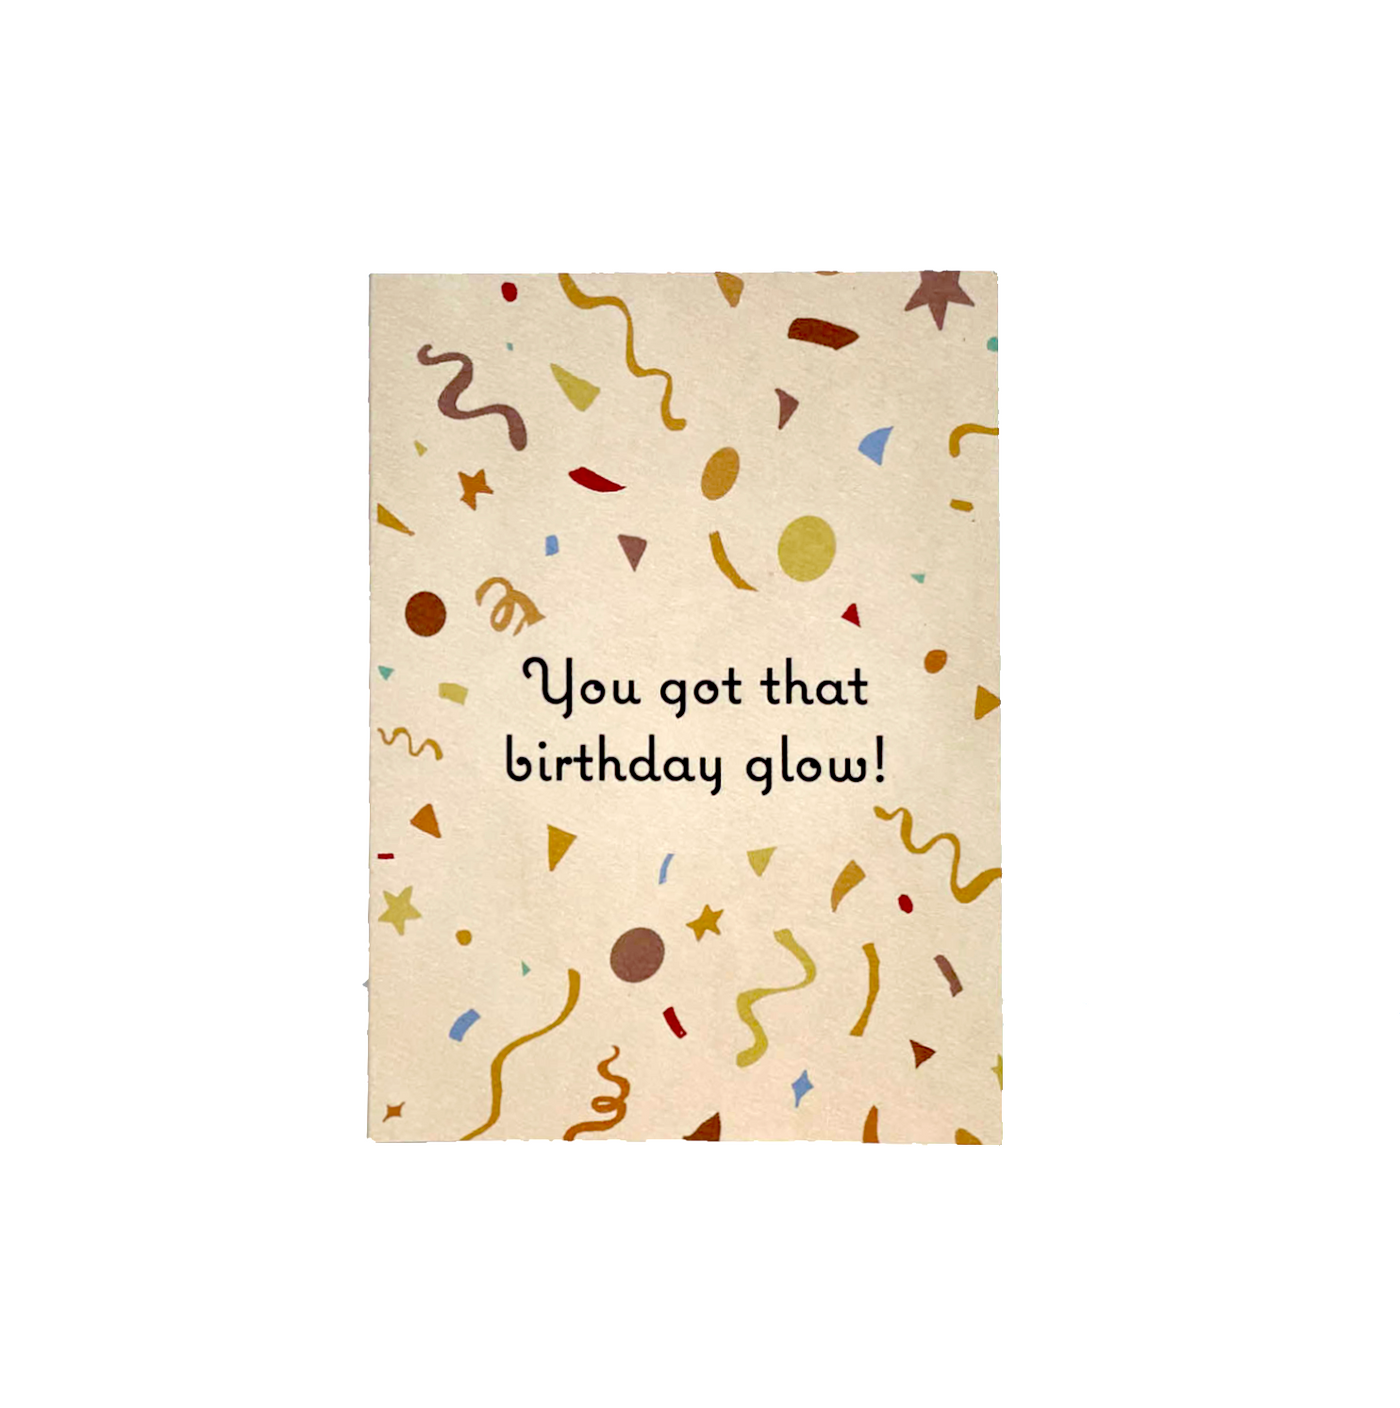 cream colored Birthday glow card that reads "You got that birthday glow!" with colorful confetti illustration.